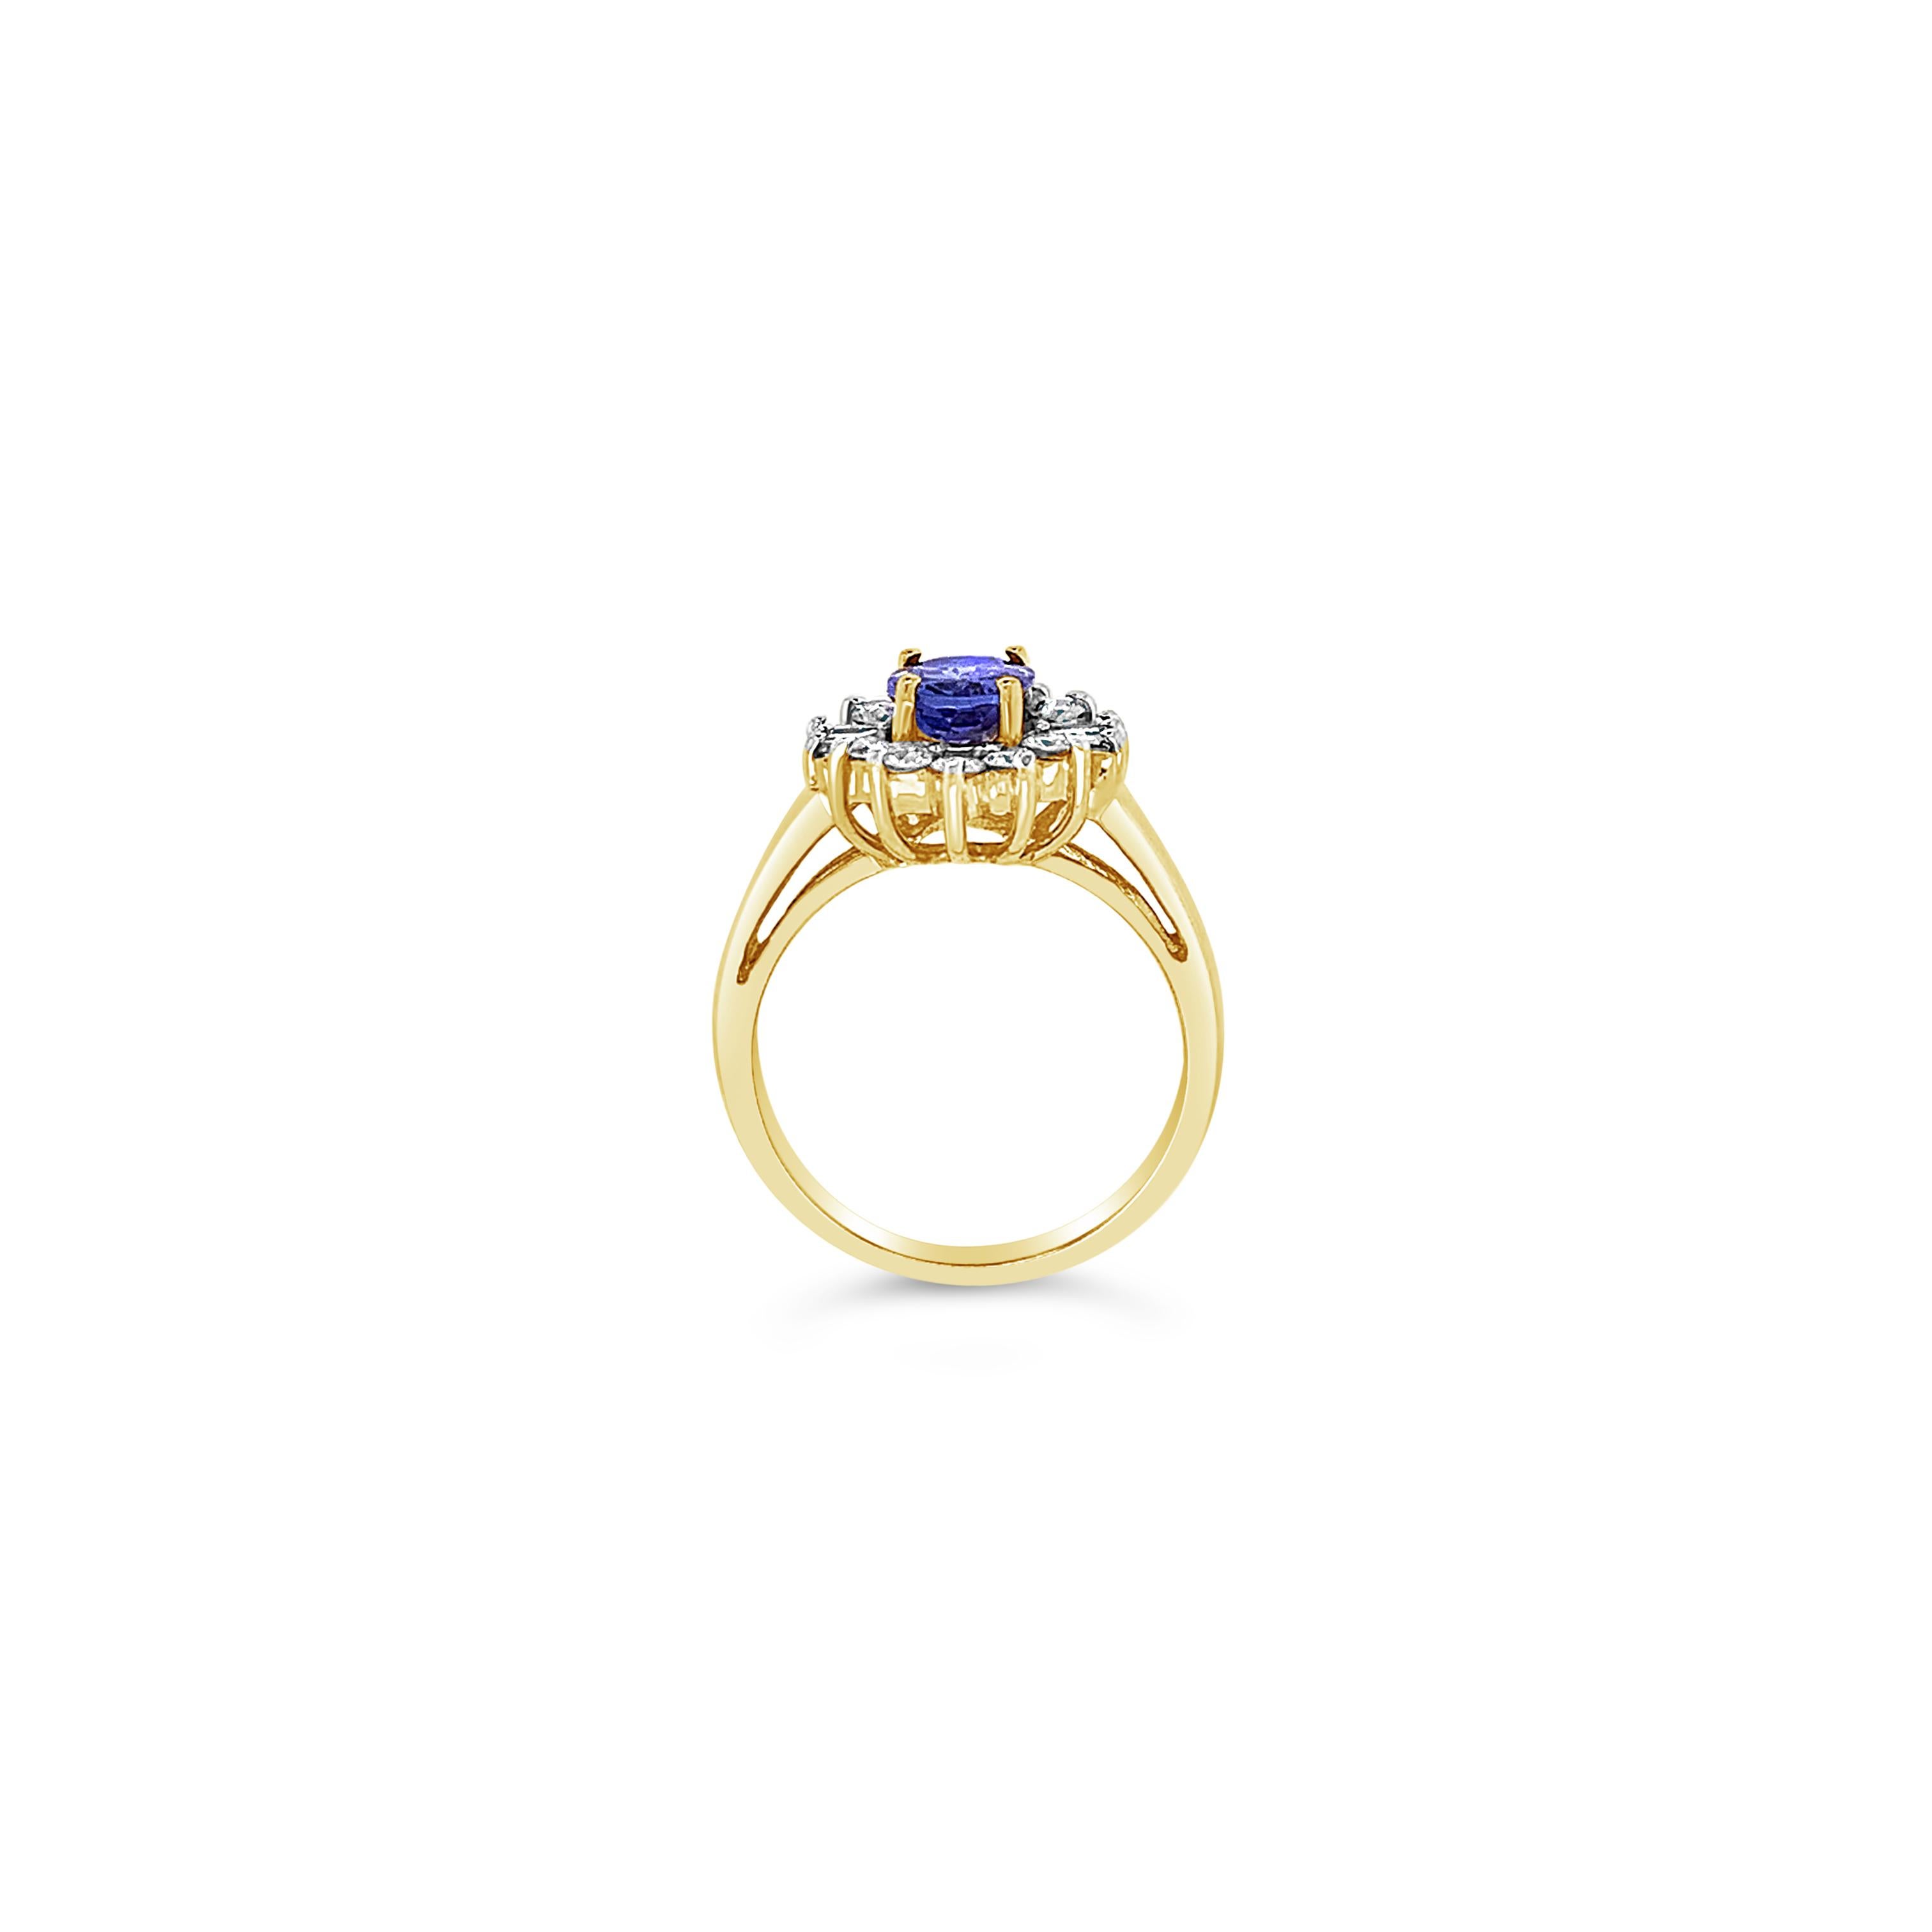 Grand Sample Sale Ring featuring 1 1/5 cts. Blueberry Tanzanite, 3/8 cts. - Diamonds, 1/5 cts. Vanilla Diamonds set in 18K Honey Gold. Please feel free to reach out with any questions! 
Item comes with a Le Vian Grand Sample Sale jewelry box as well